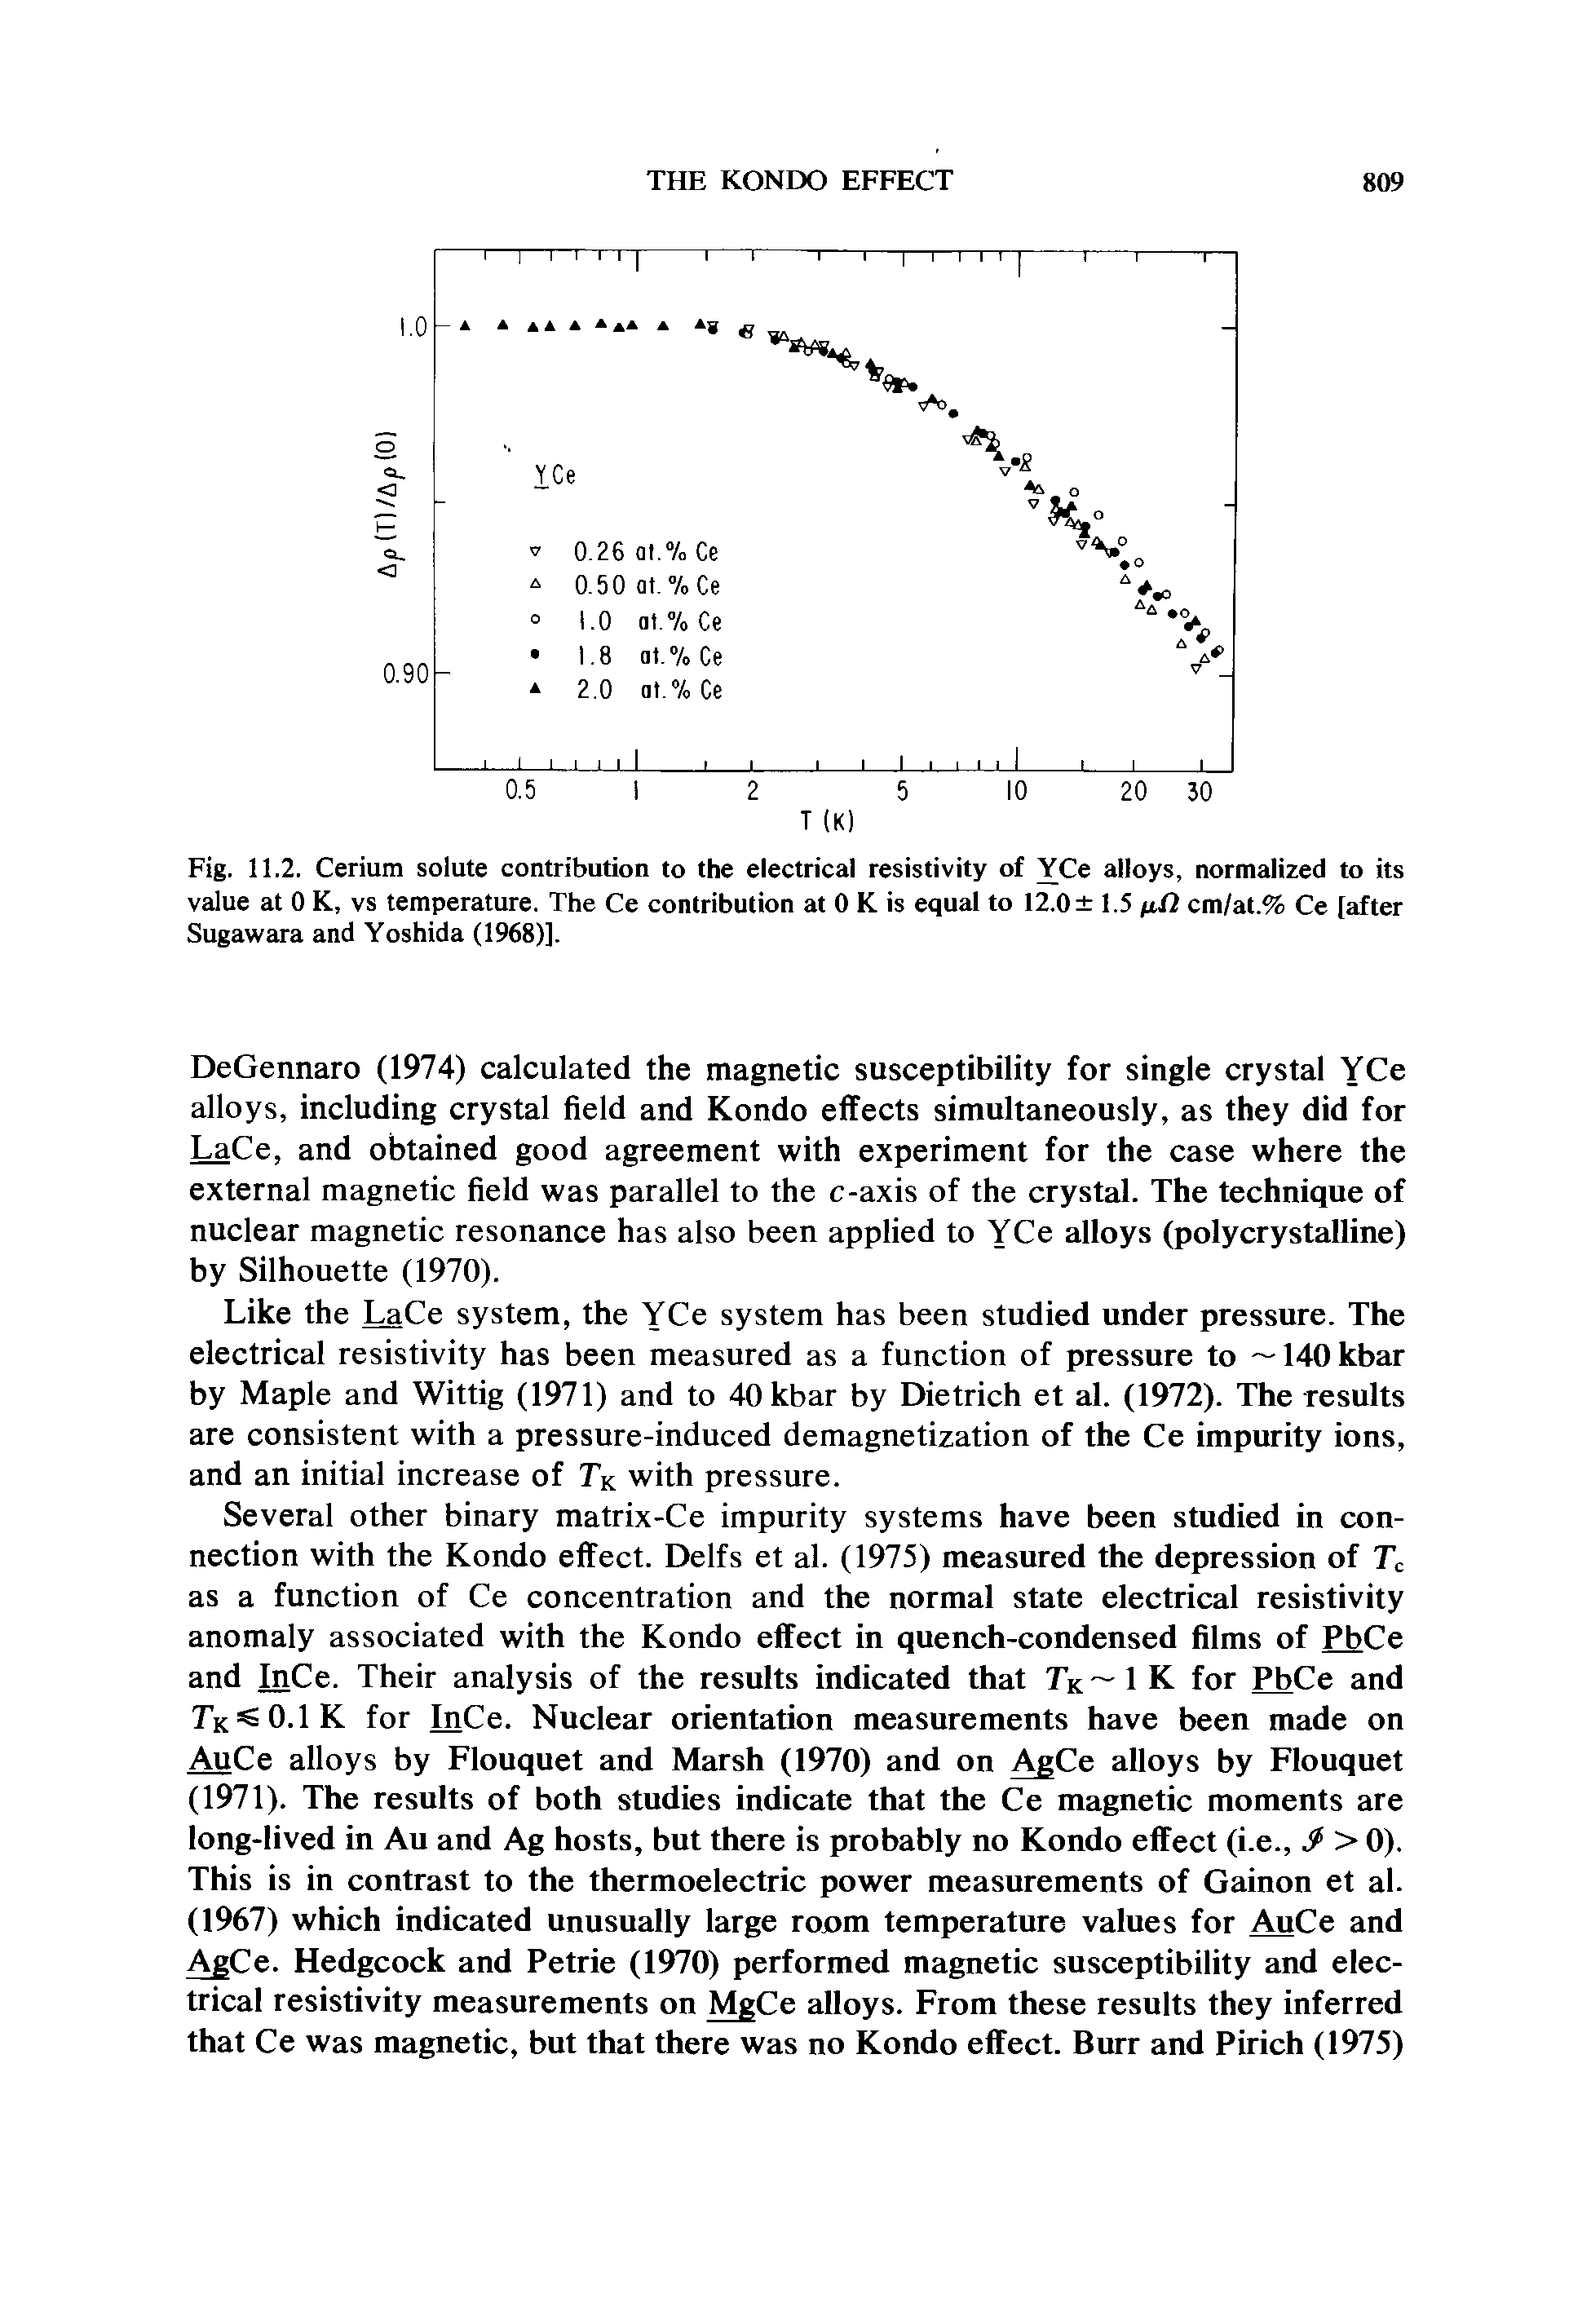 Fig. 11.2. Cerium solute contribution to the electrical resistivity of YCe alloys, normalized to its value at 0 K, vs temperature. The Ce contribution at 0 K is equal to 12.0 1.5 ftH cm/at.% Ce [after Sugawara and Yoshida (1968)].